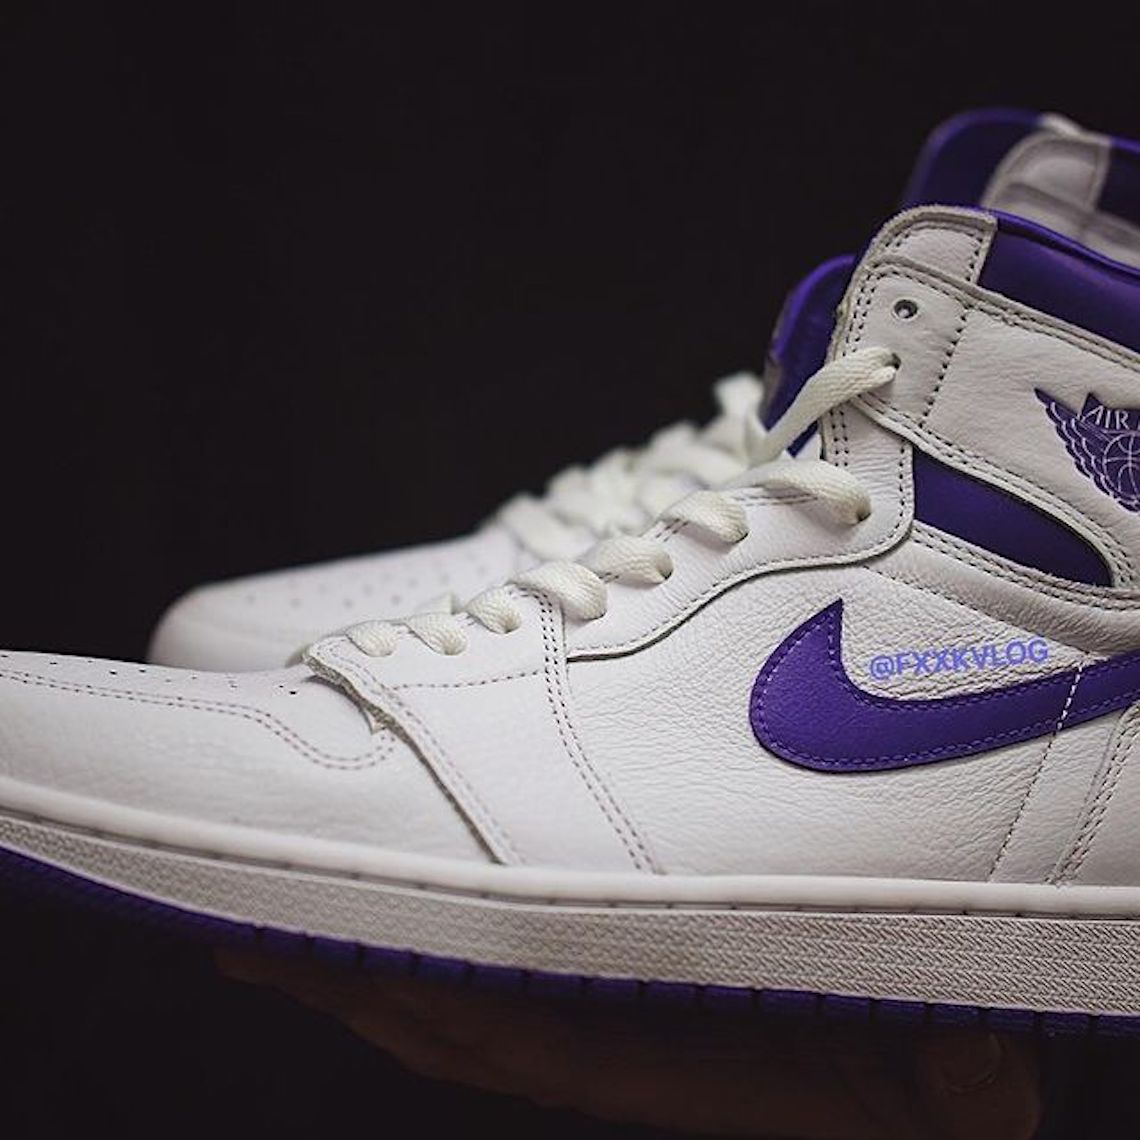 Synthetic leather strap with Jordan branding Retro High Og Wmns White Court Purple Cd0461 151 15